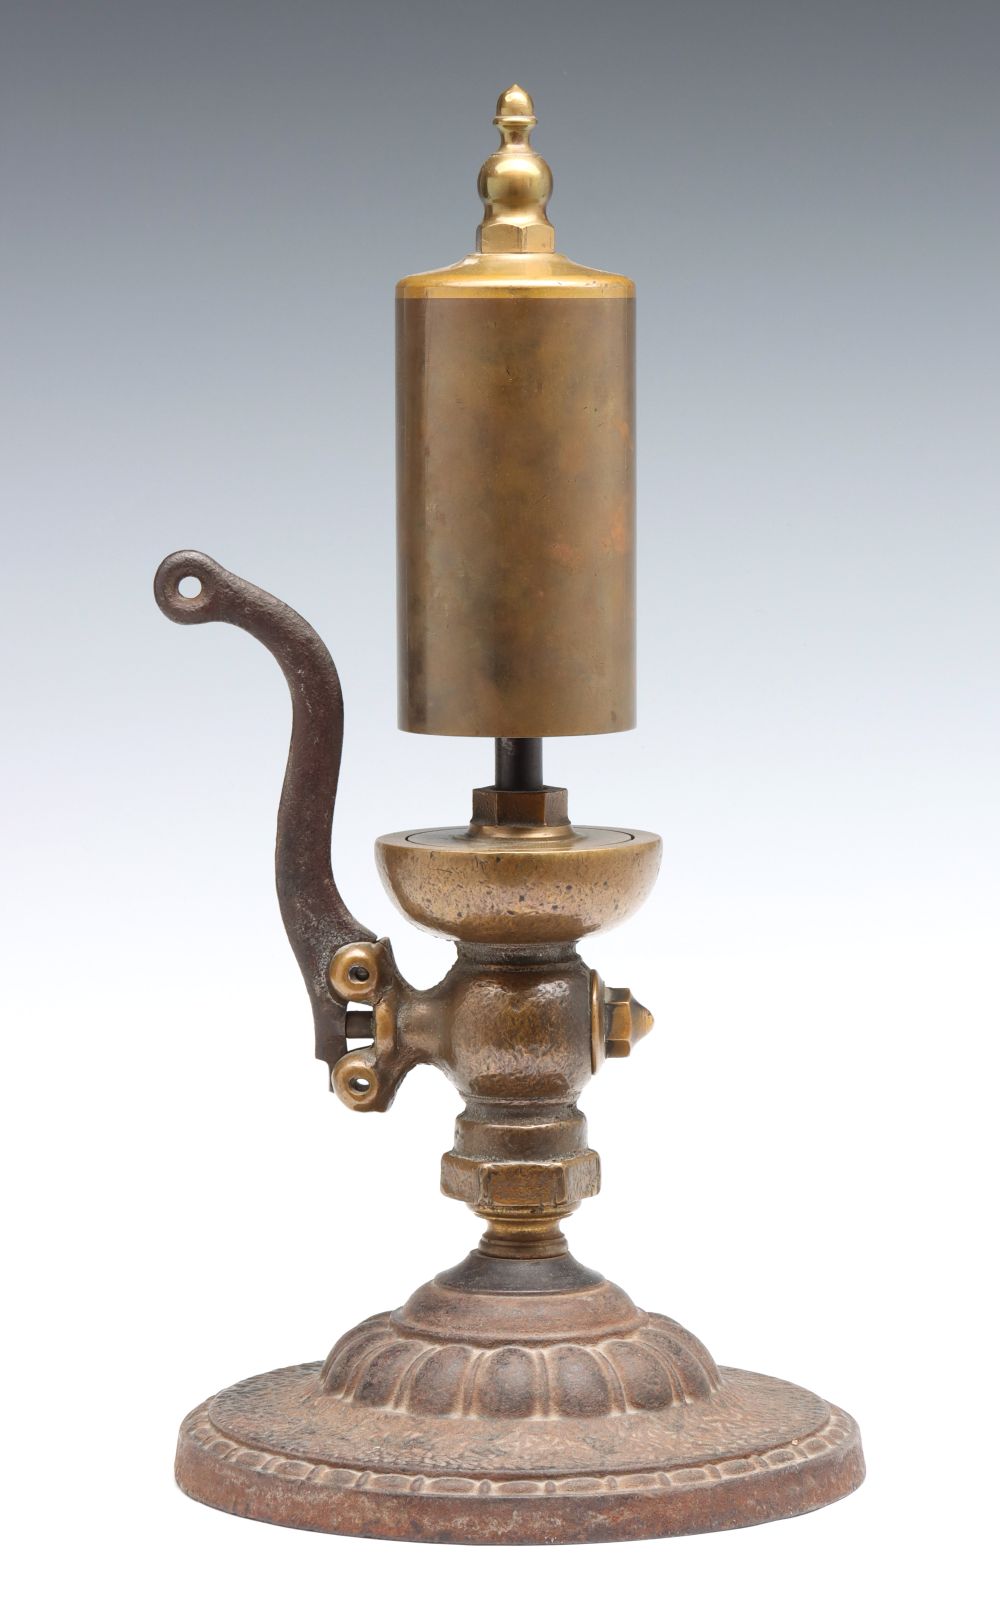 AN ORNATE LATE 19TH CENTURY SINGLE NOTE STEAM WHISTLE